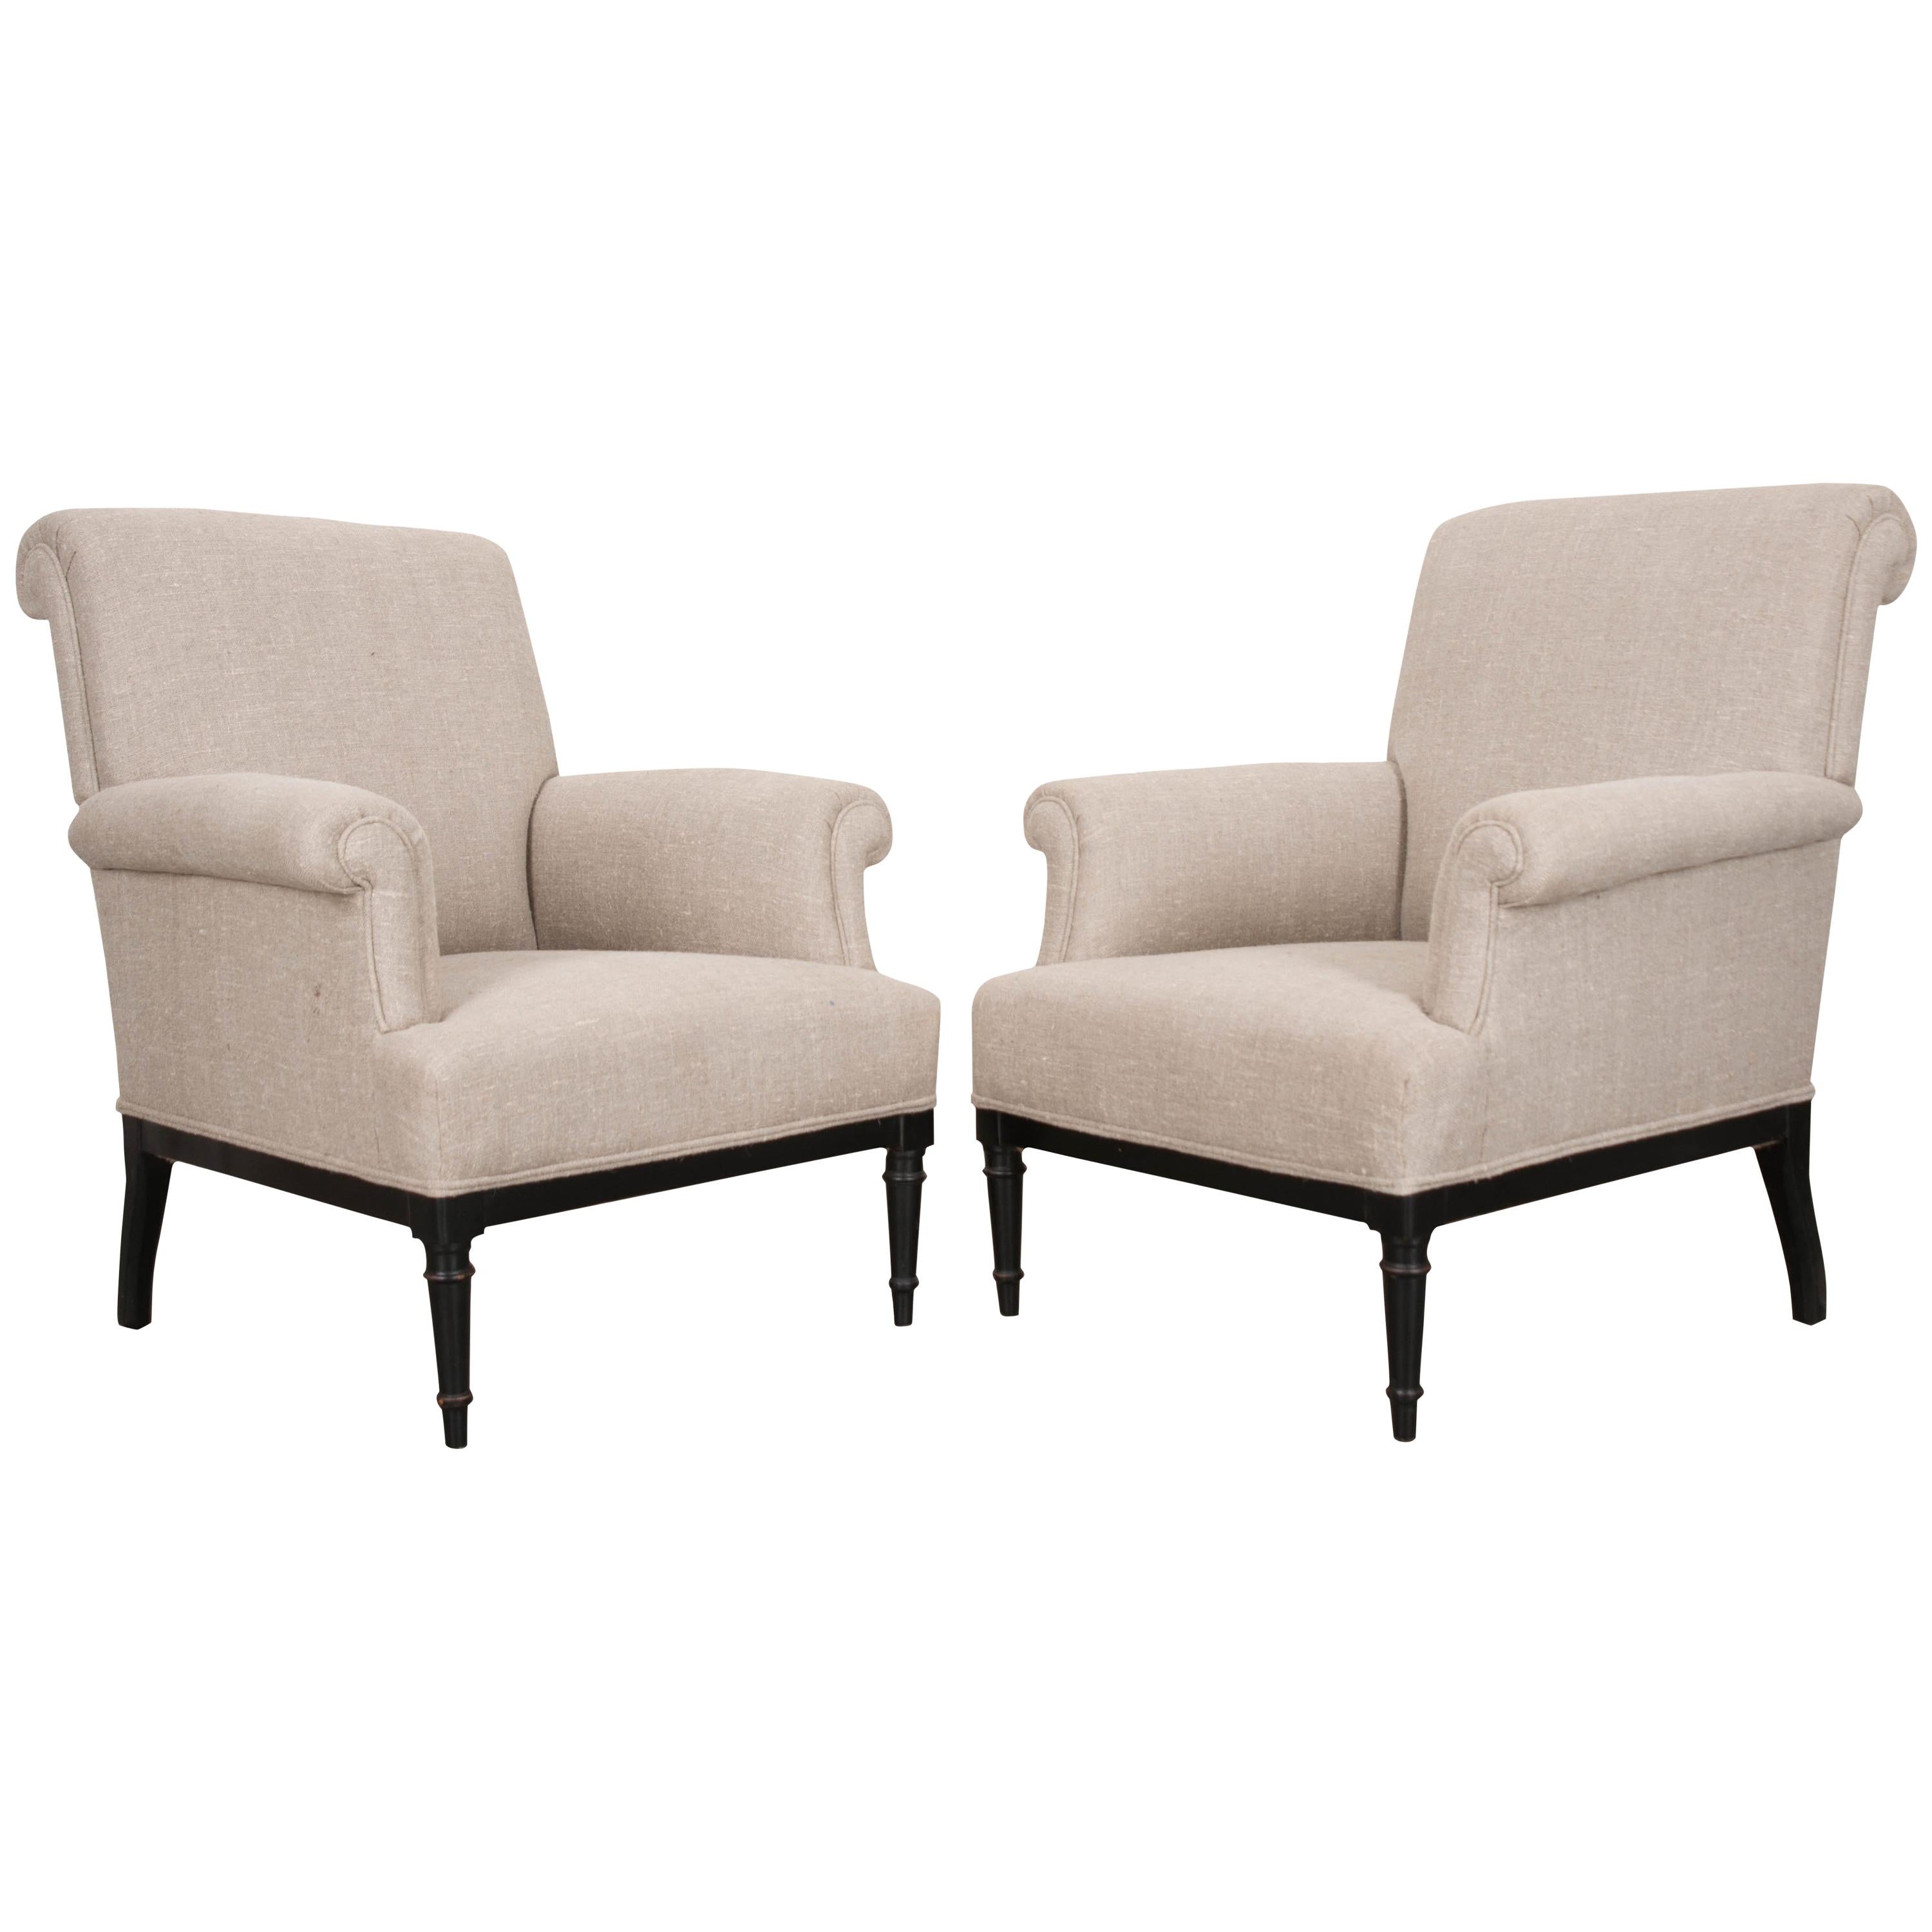 Pair of 19th Century French Upholstered Bergères